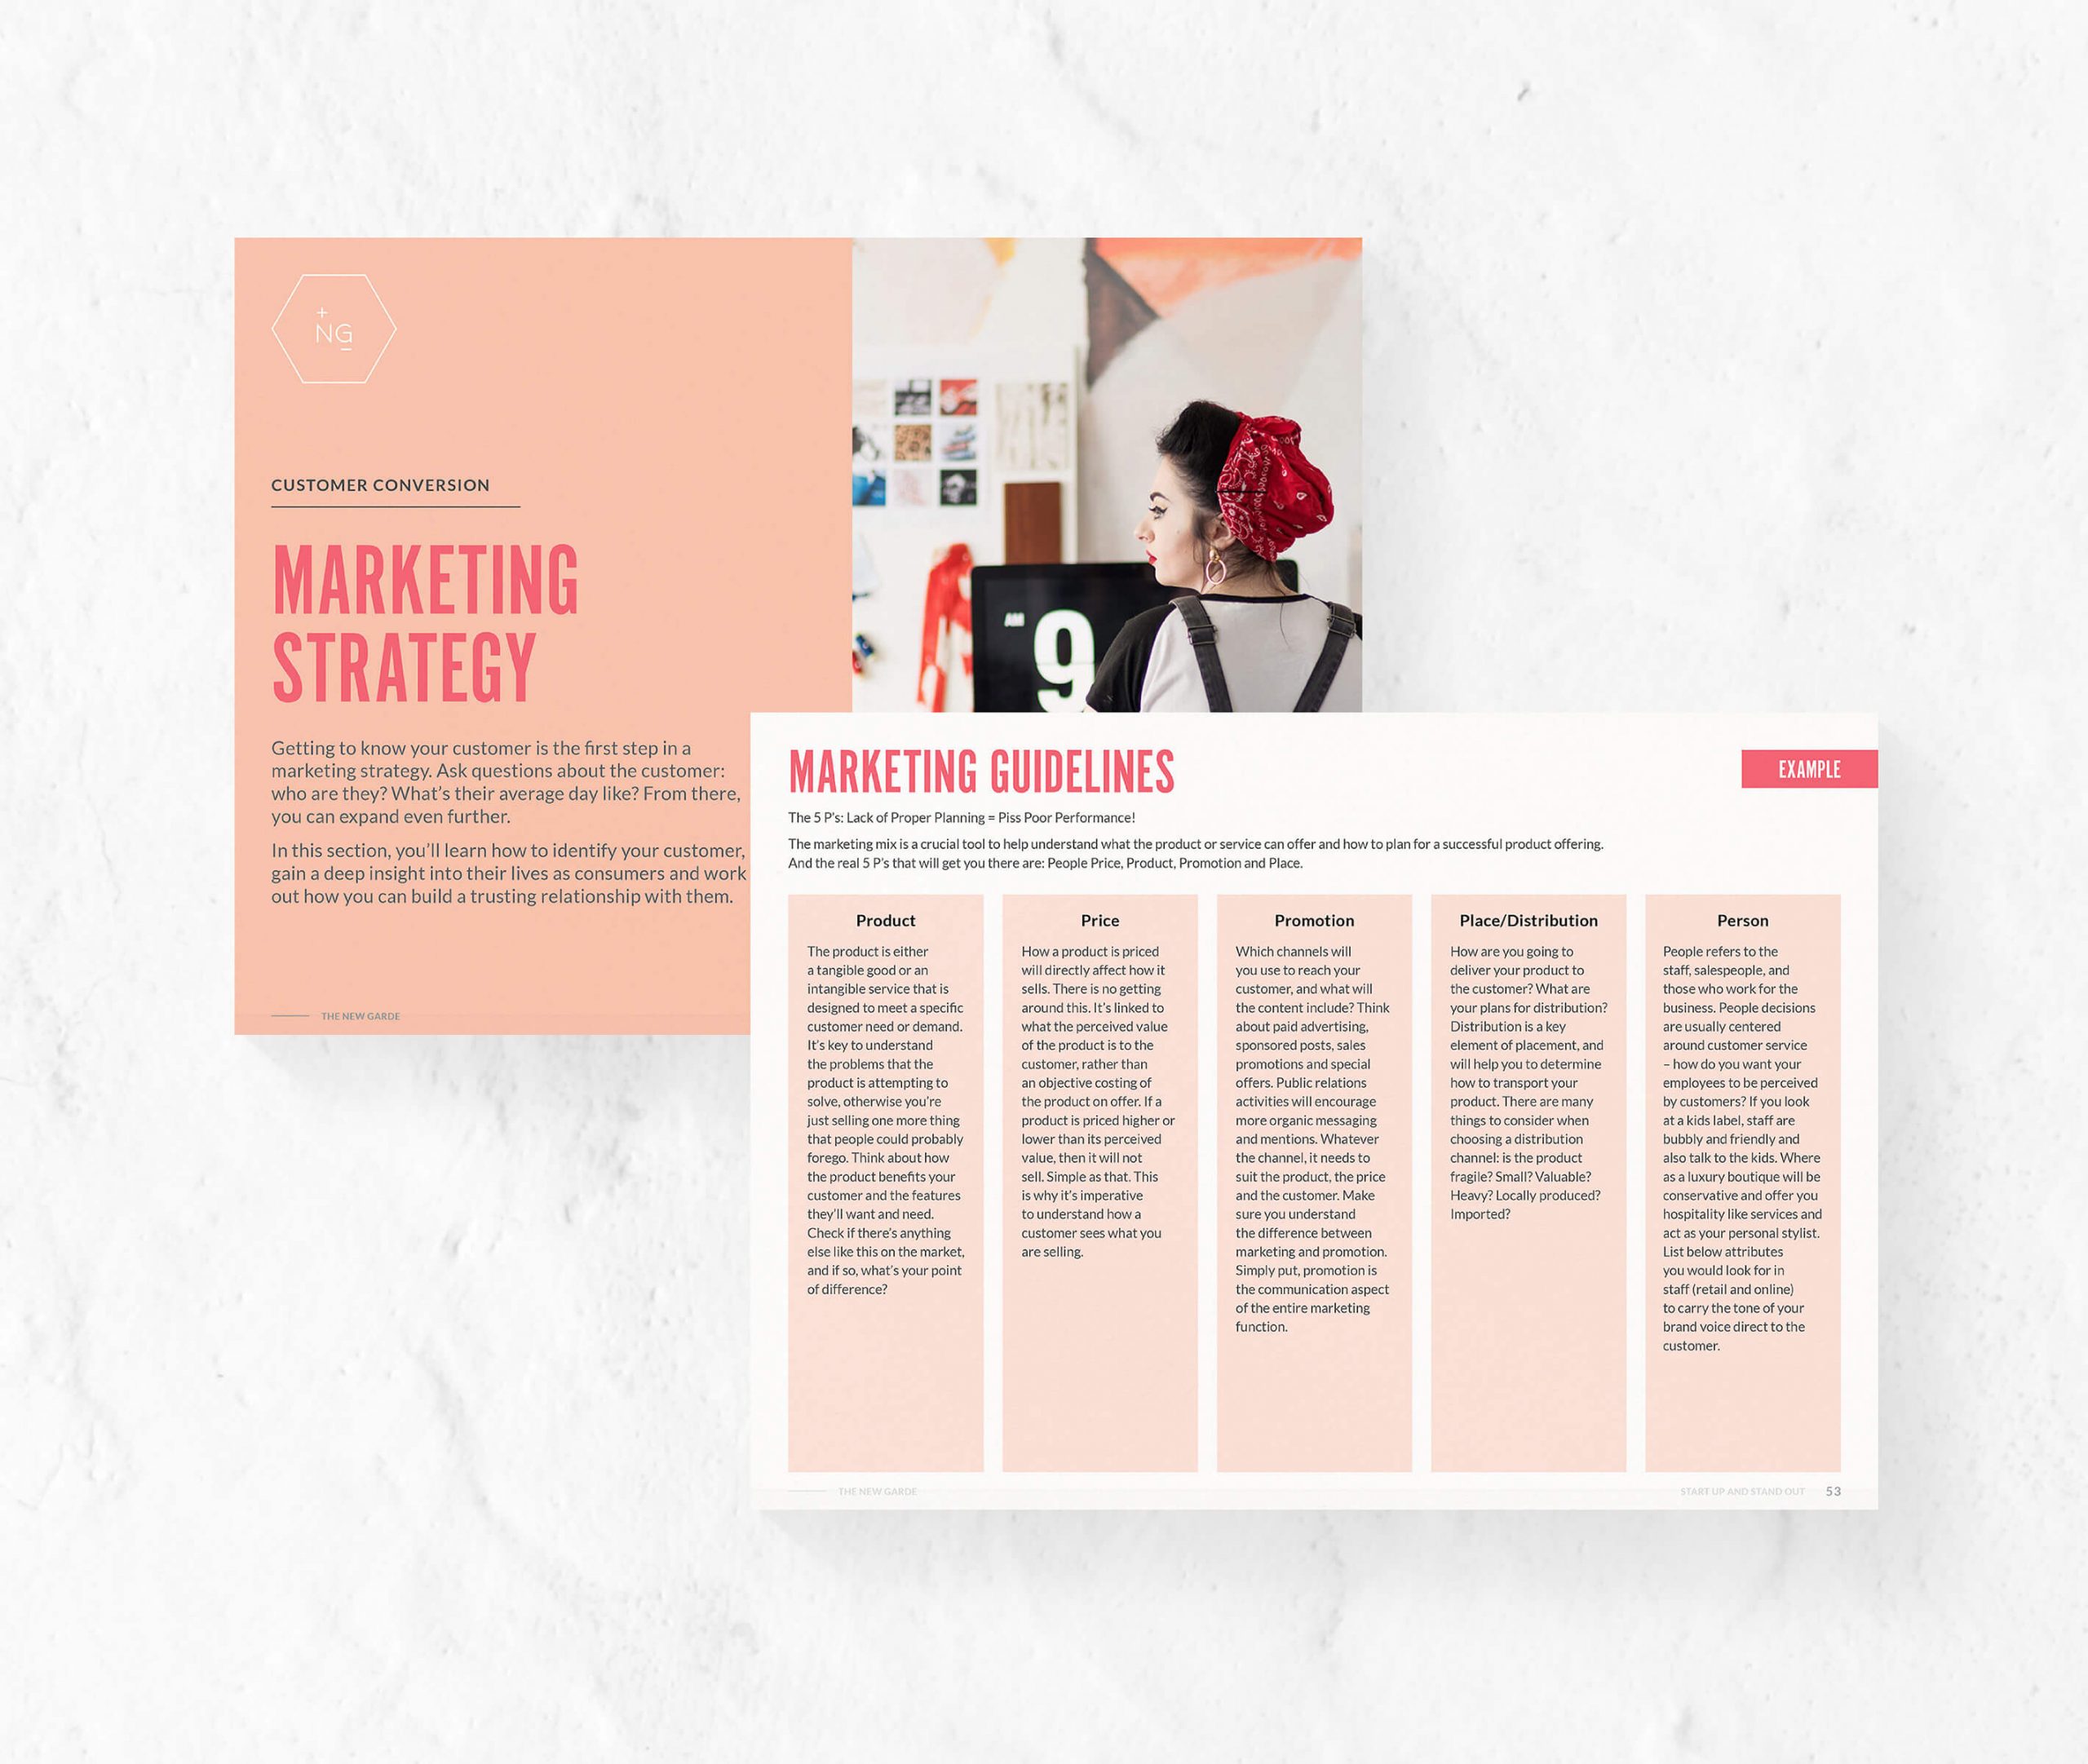 two pages from The New Garde ebook regarding marketing for fashion labels